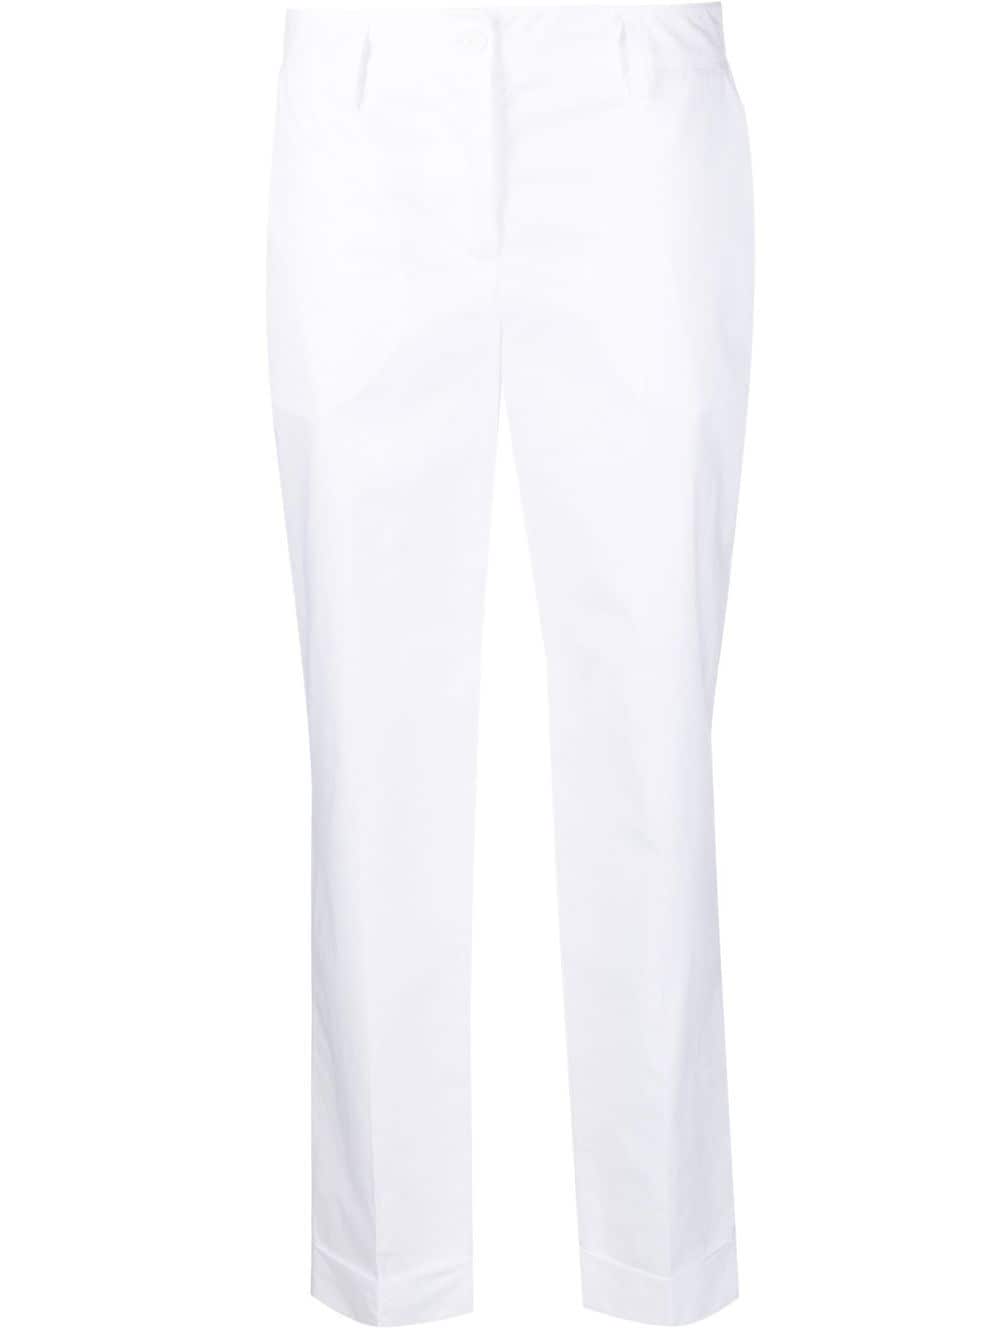 P.A.R.O.S.H. tapered-leg tailored trousers - White von P.A.R.O.S.H.